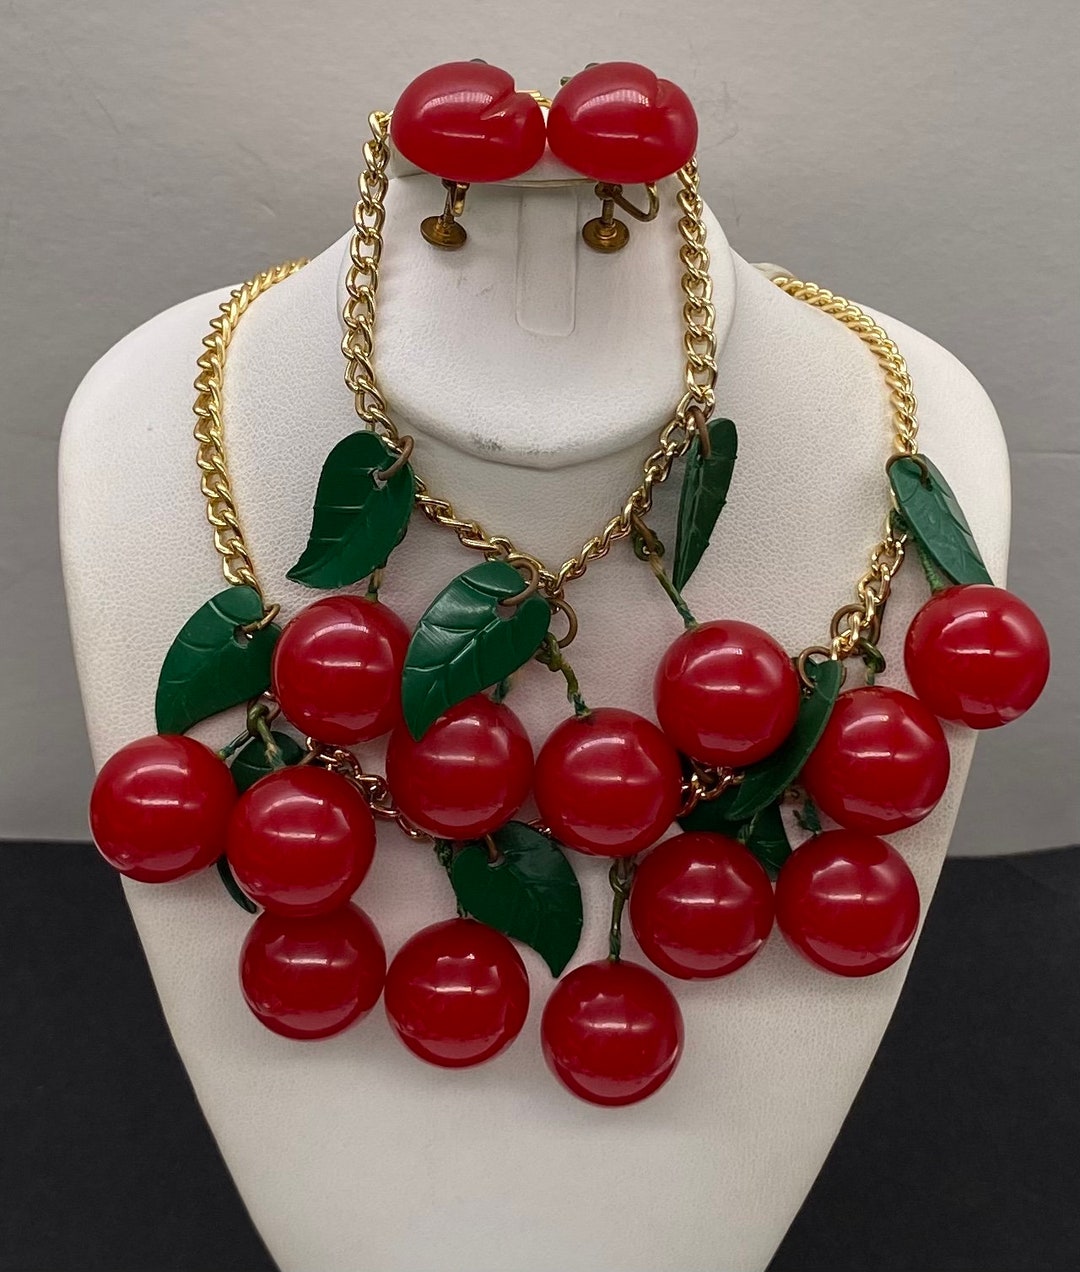 Antique Bakelite Celluloid Art Deco Red Cherries Hanging Jewelry Set  Necklace, Bracelet & Matching Earrings - Etsy